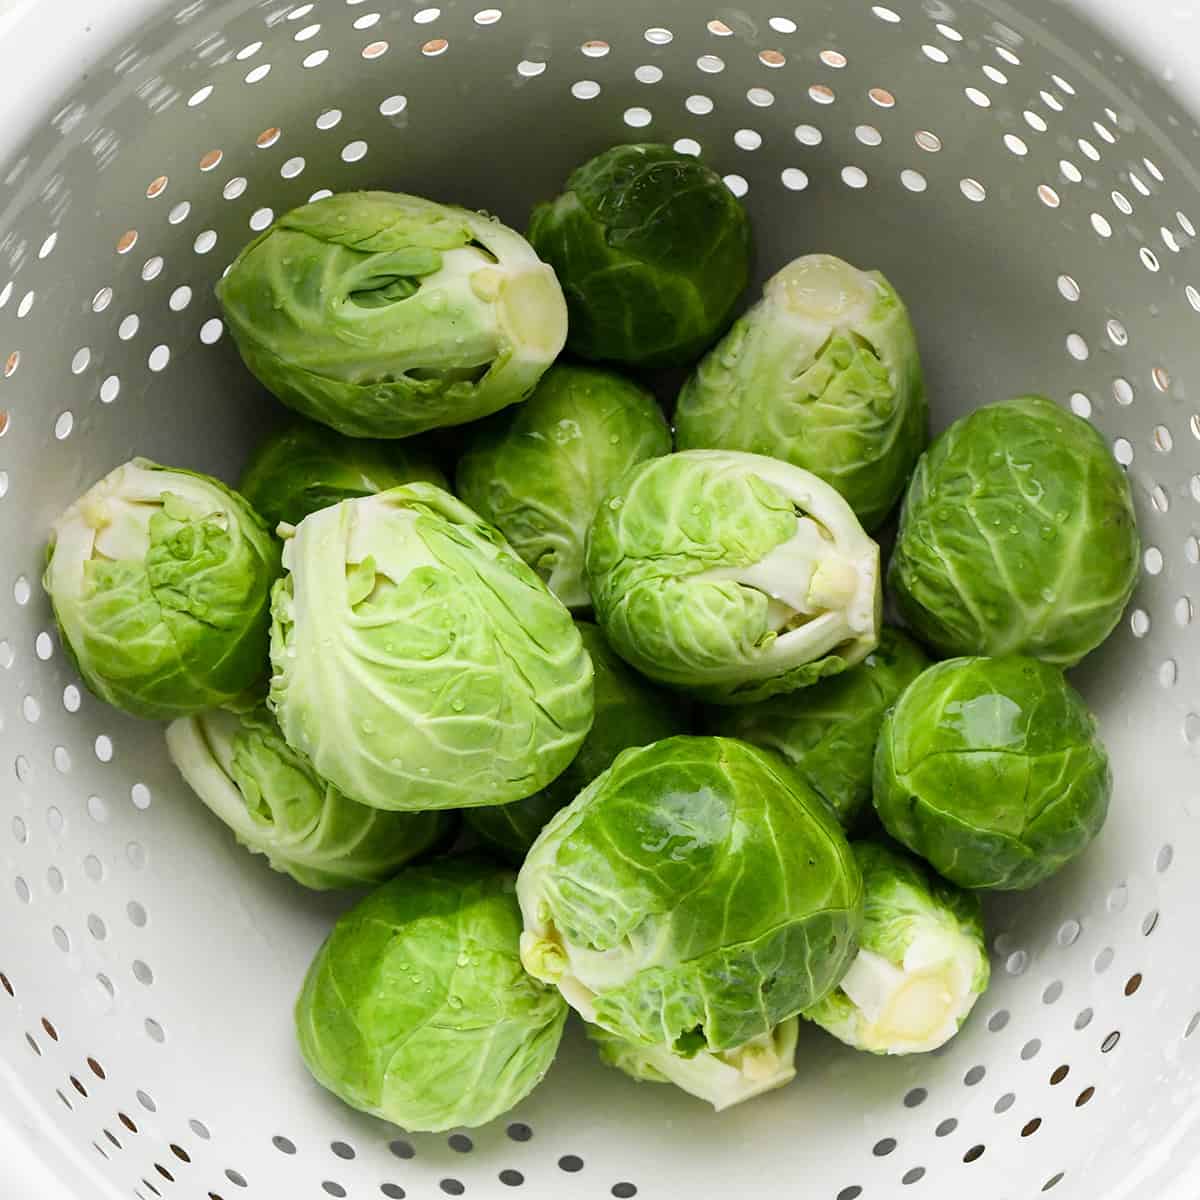 brussels sprouts in a colander to be washed